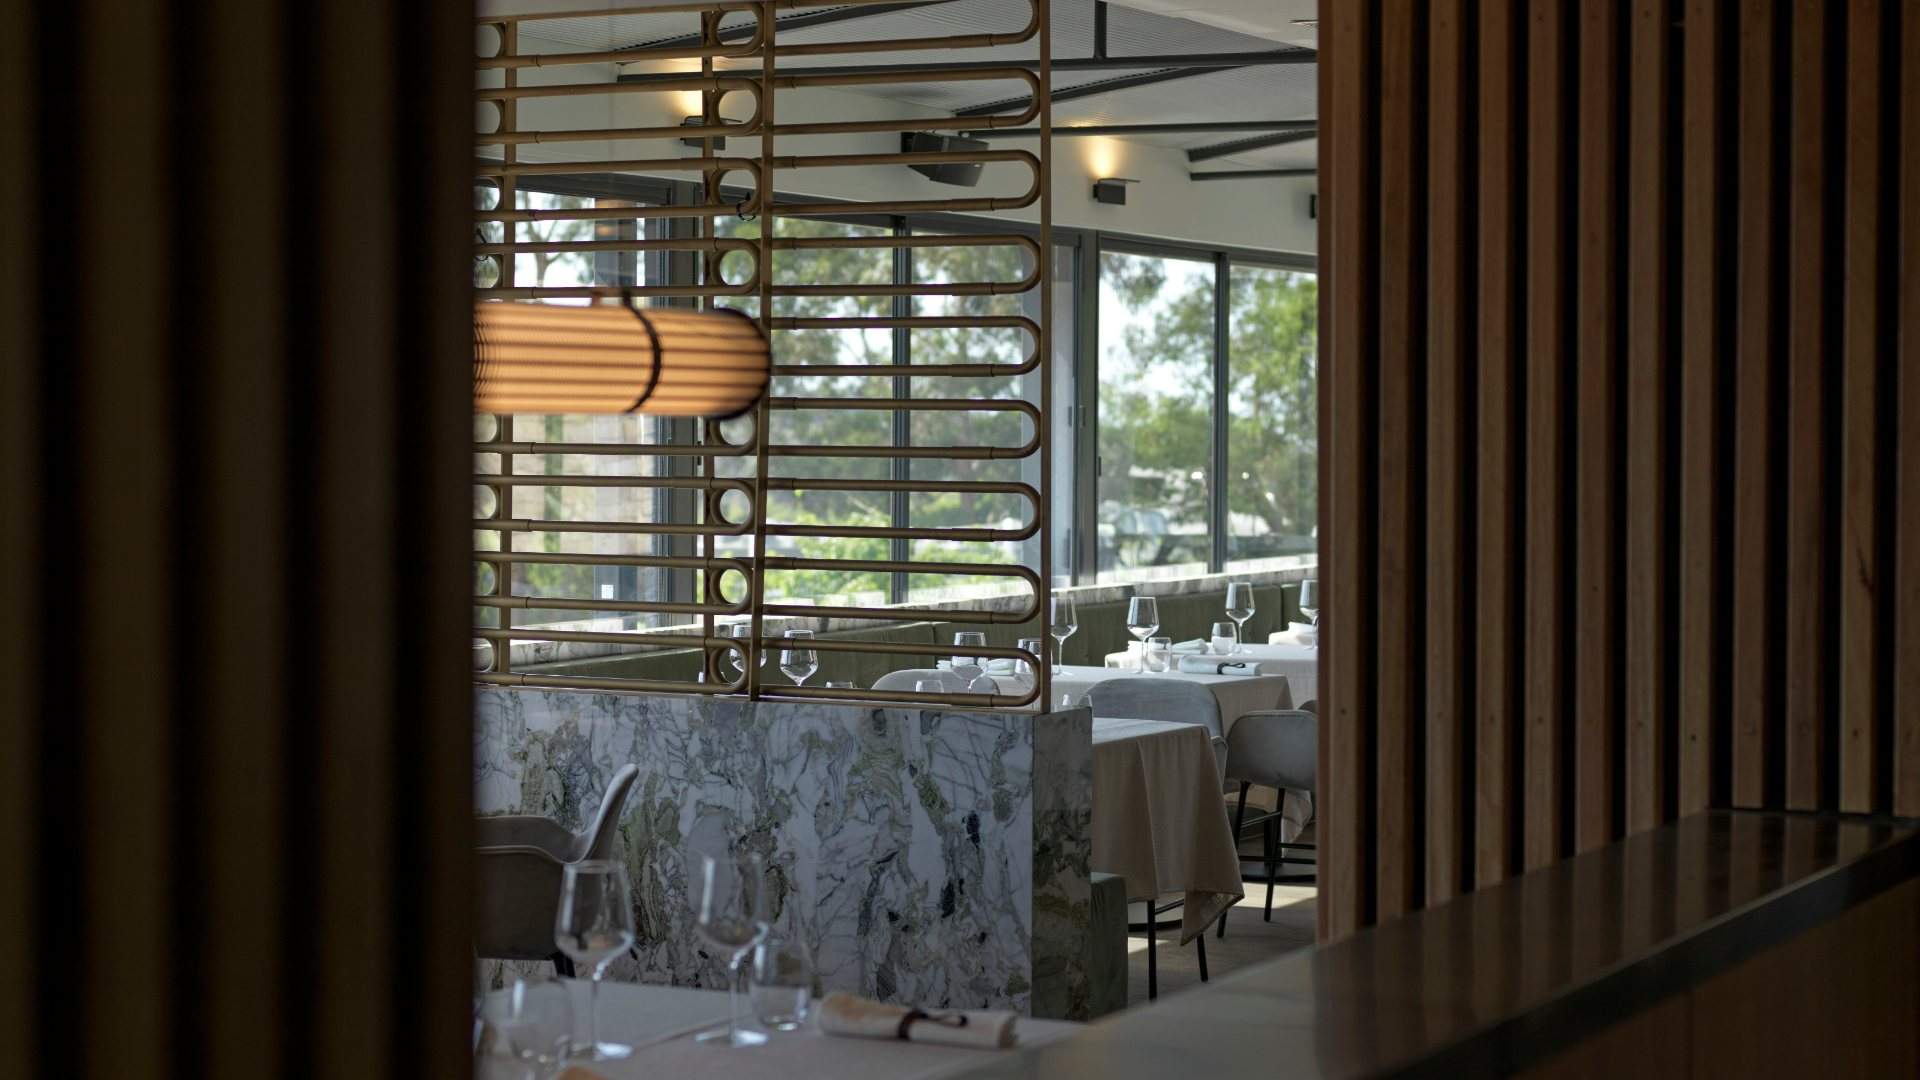 Mornington Peninsula Restaurant Ten Minutes by Tractor Has Reopened Following Last Year's Fire